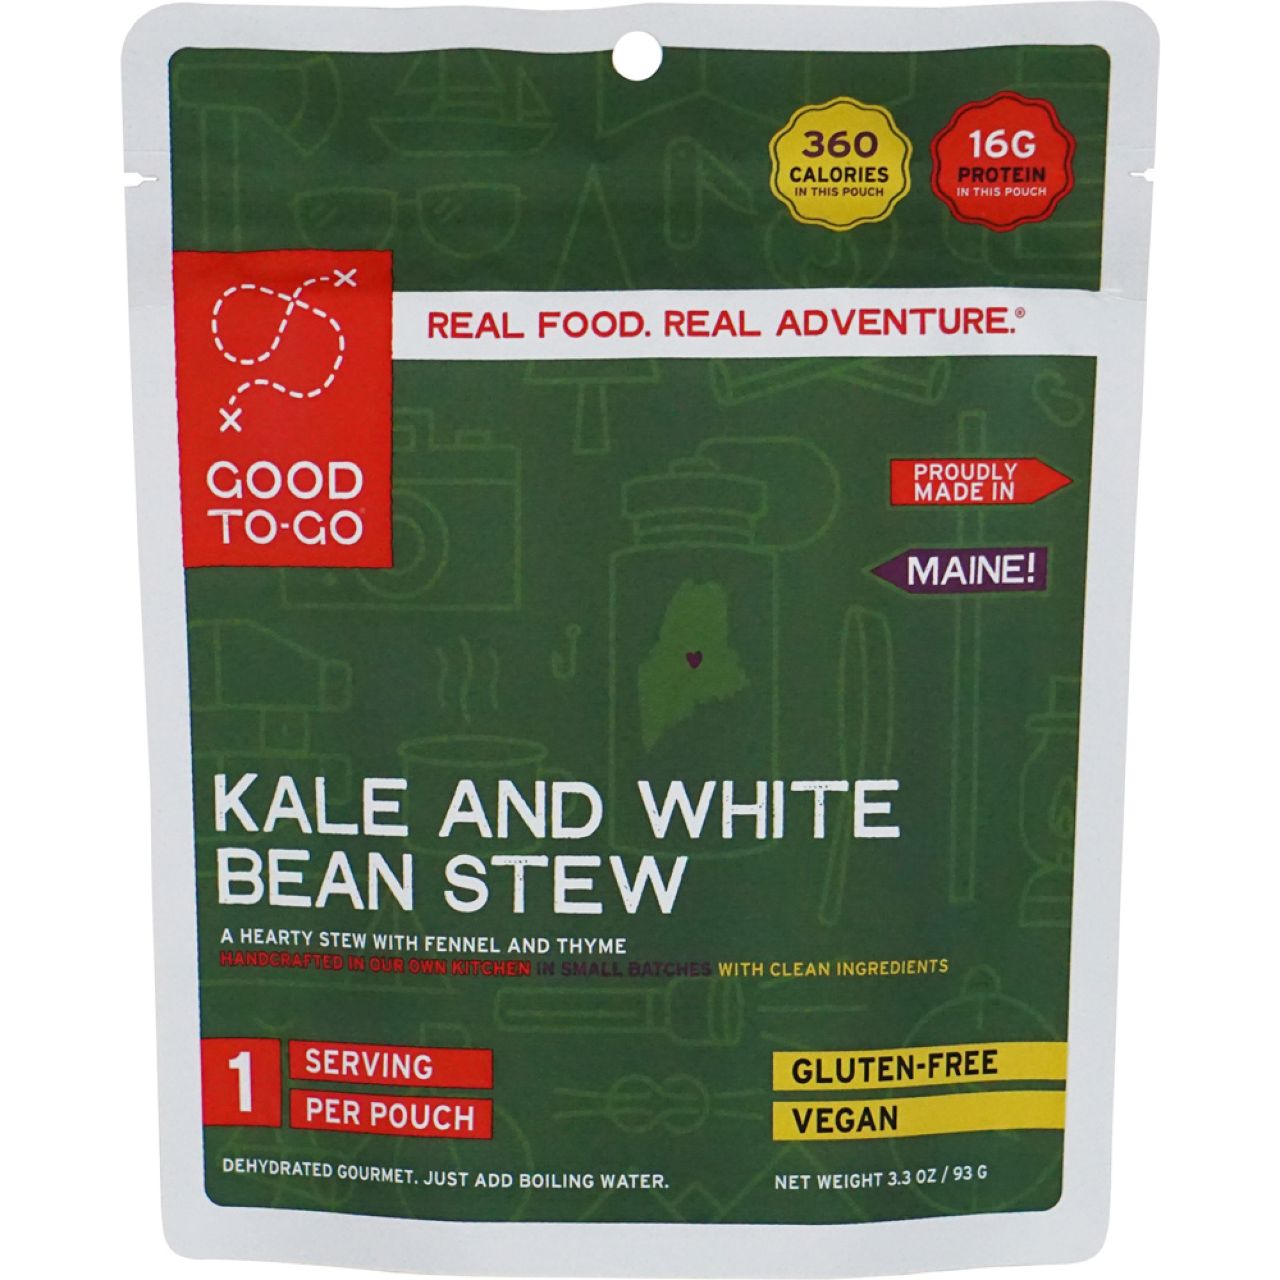 Good To-Go Kale and White Bean Stew - 1 Serving